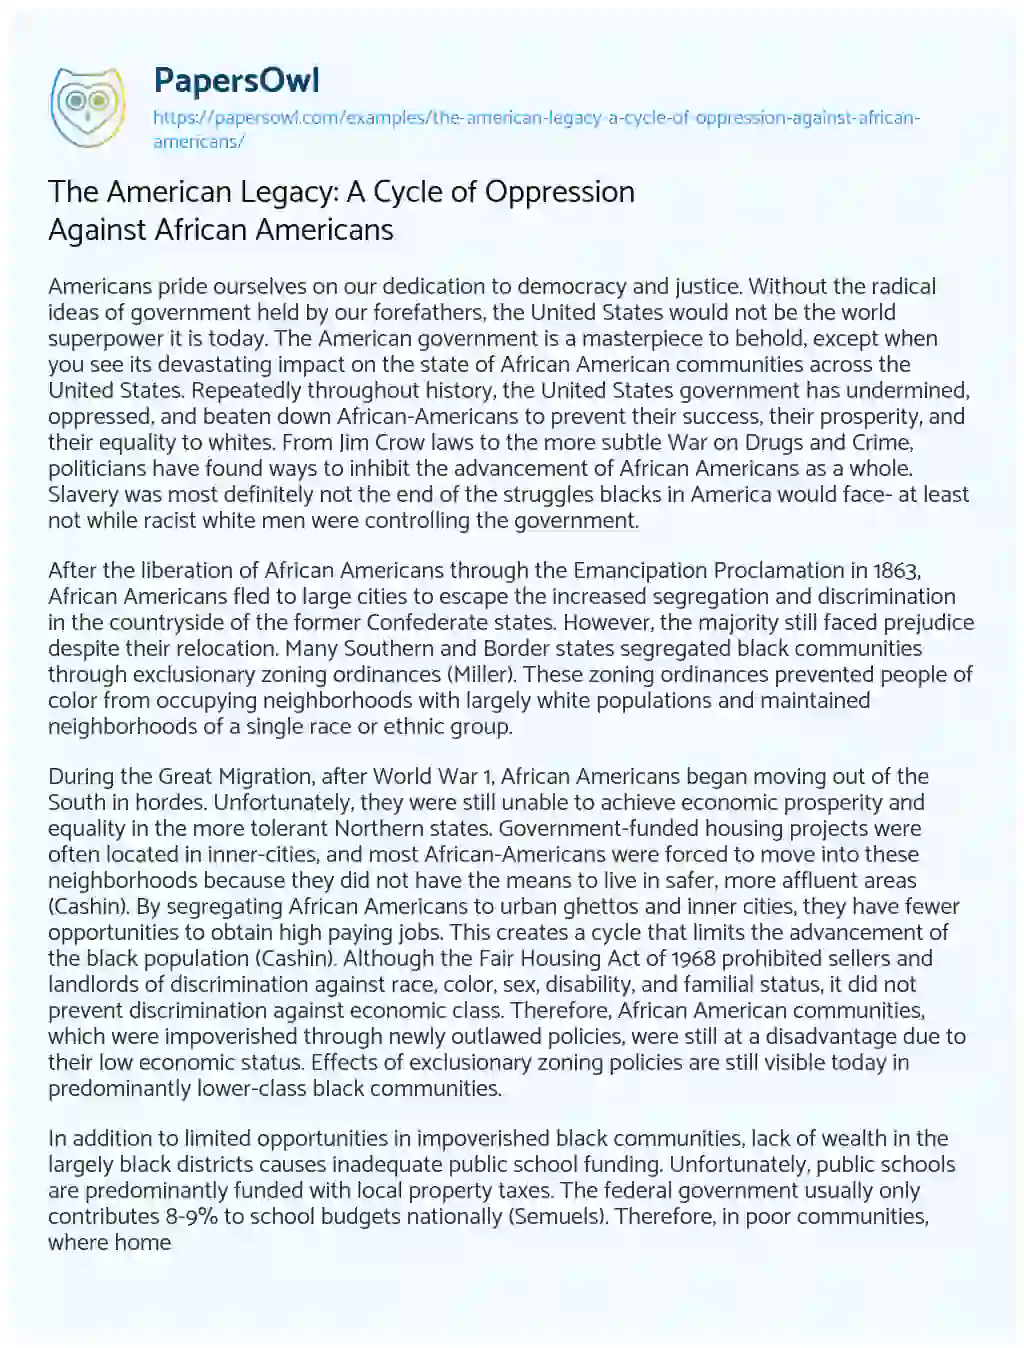 The American Legacy: a Cycle of Oppression against African Americans essay